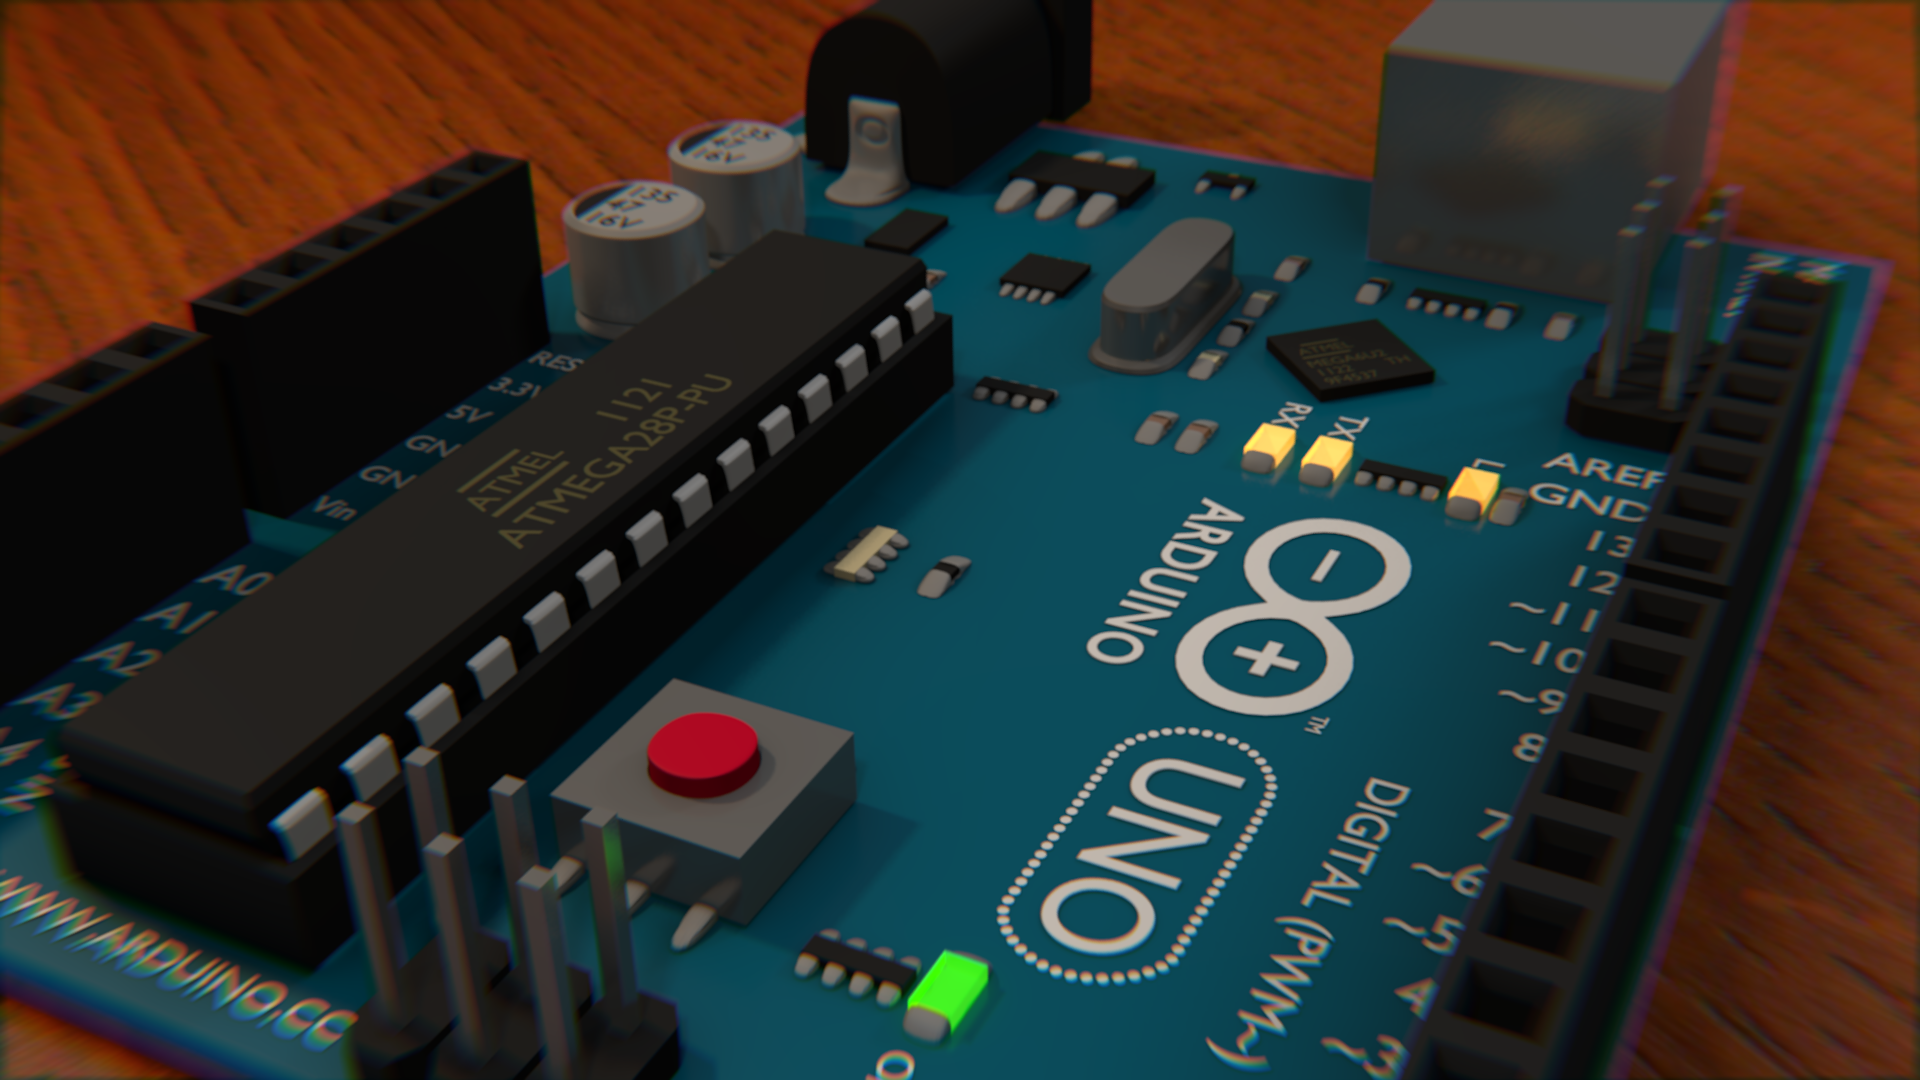 Another angle of the finished Arduino Uno in Blender